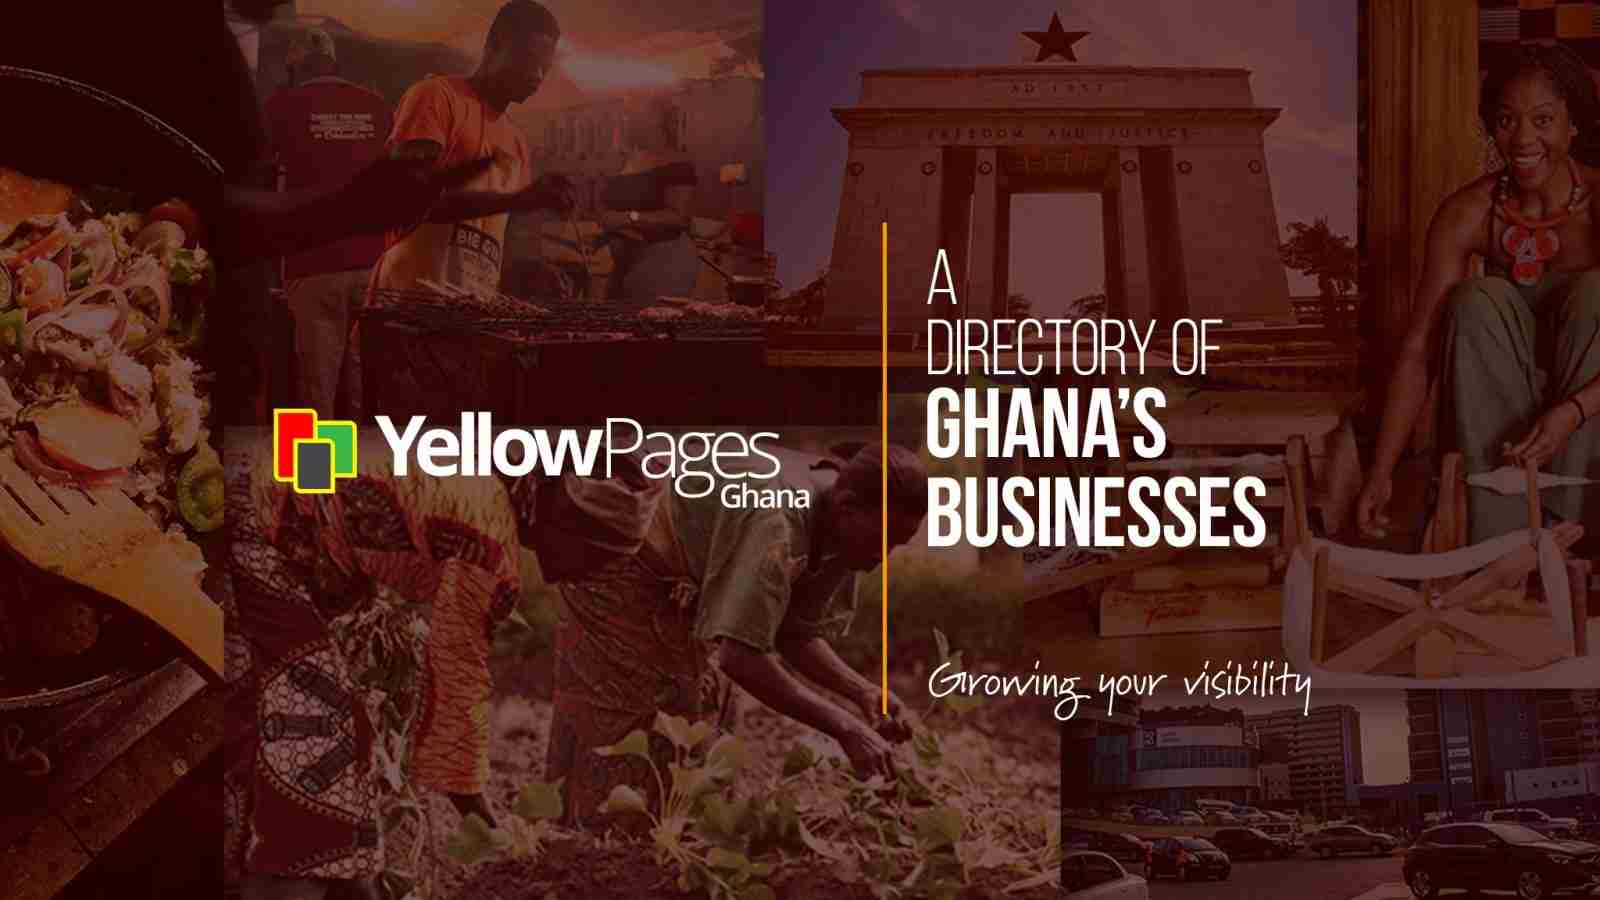 Yellow Pages Ghana - Ghana Business Directory